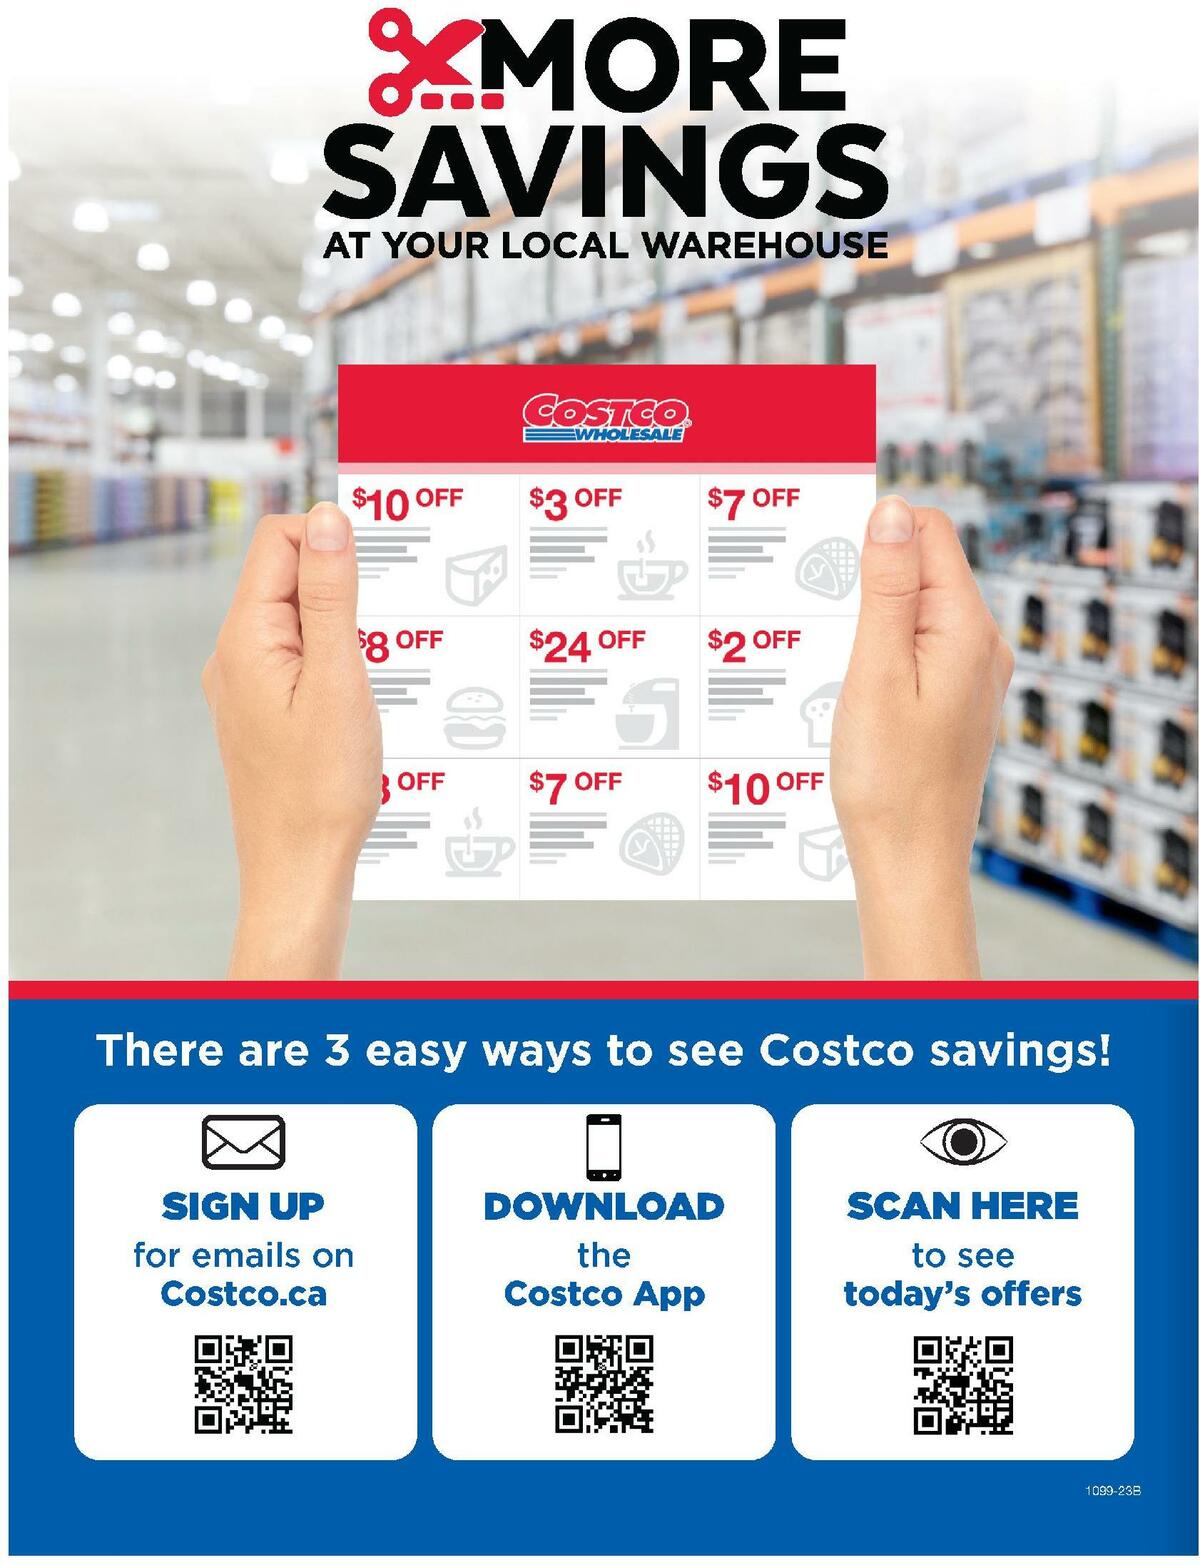 Costco Connection December Flyer from December 1